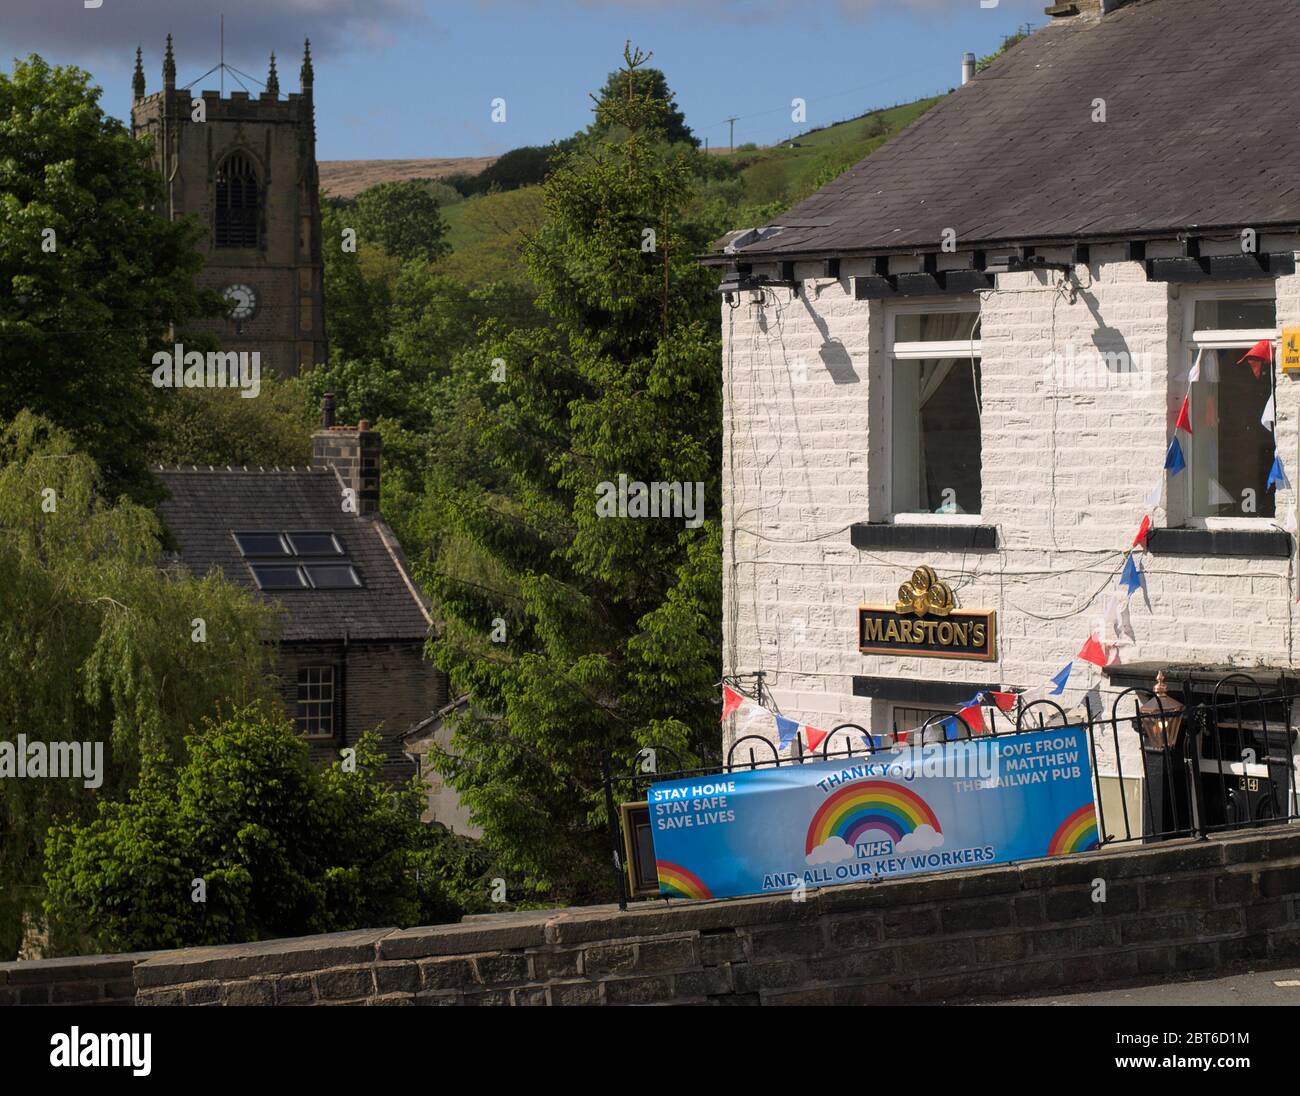 The Railway pub, Marsden with both 'TO LET' and 'NHS / KEY WORKER THANK YOU' signs during the Coronavirus (COVID-19) pandemic. Stock Photo